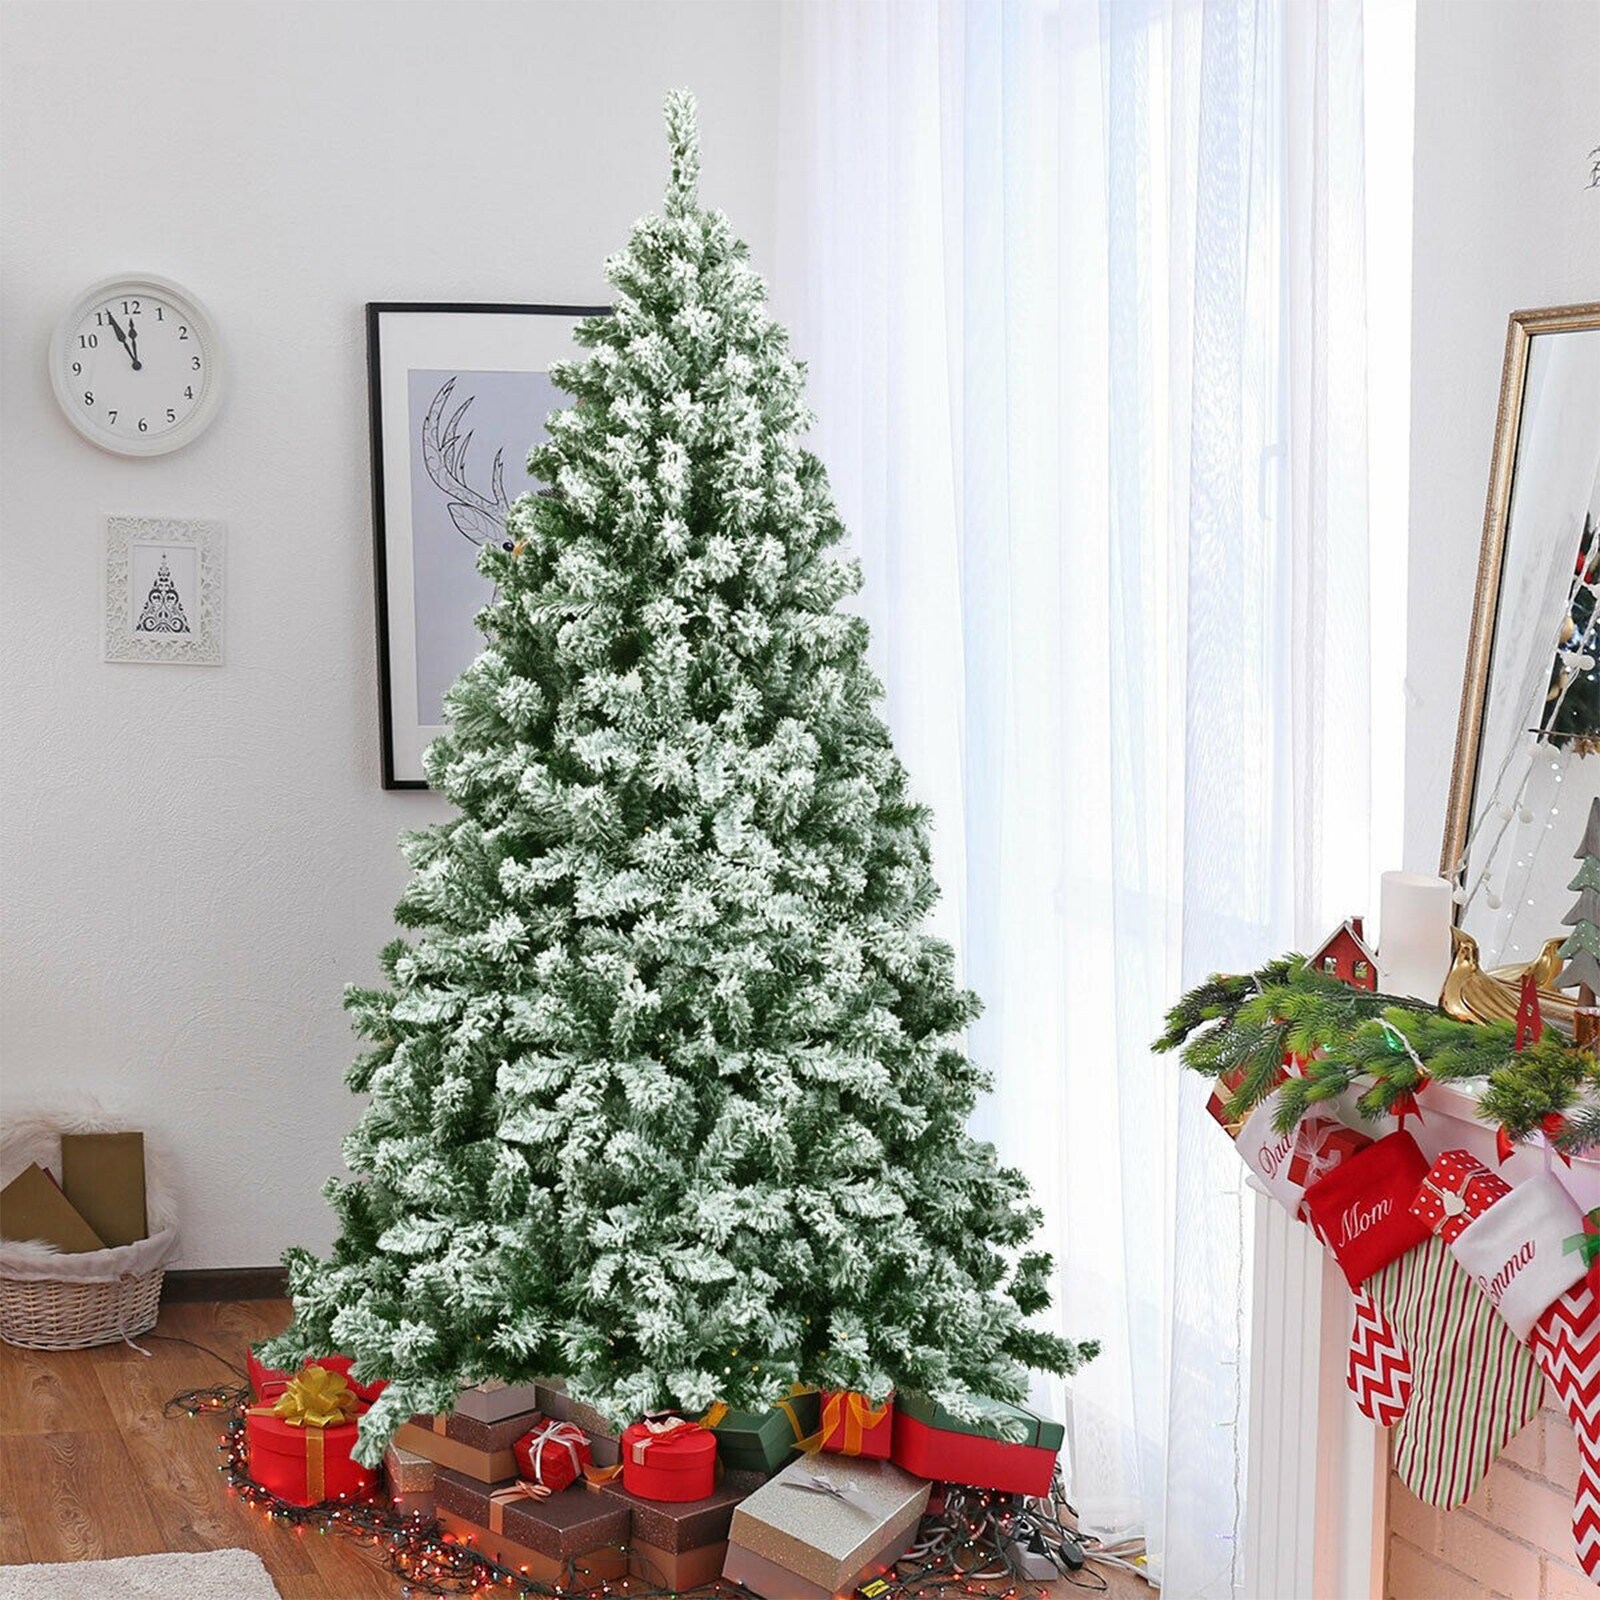 WELLFOR 6-ft Flocked Artificial Christmas Tree in the Artificial ...